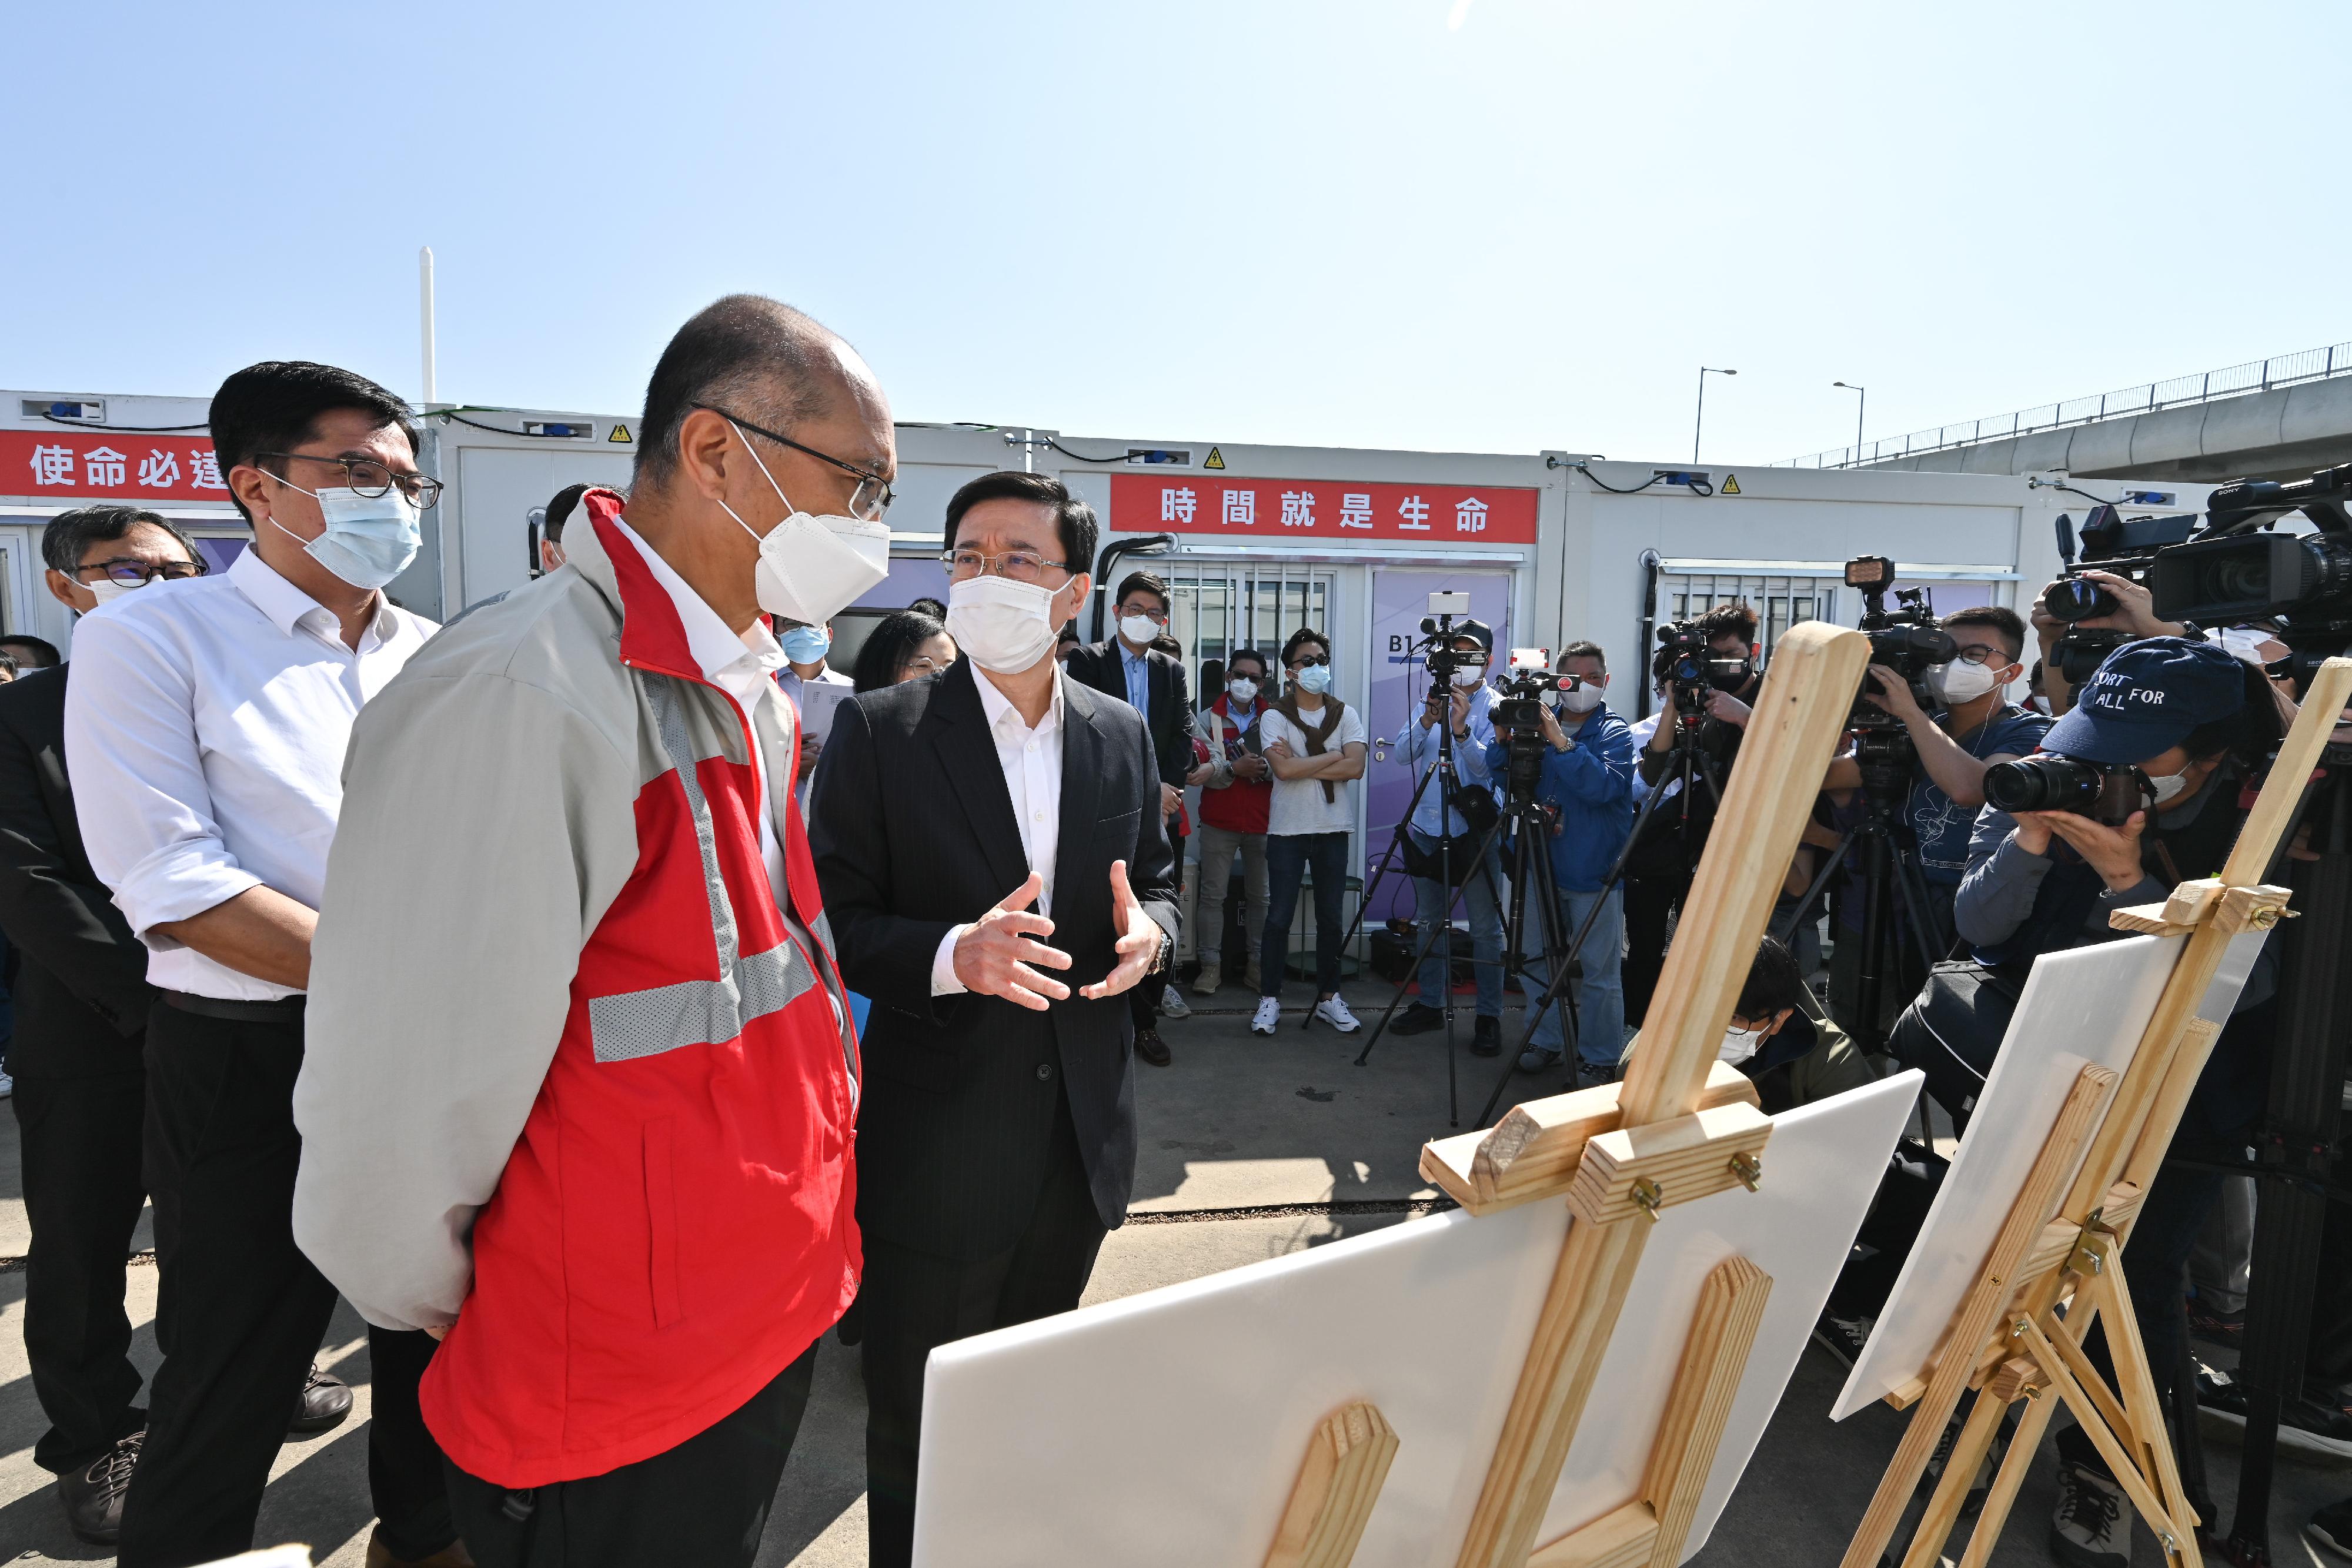 The Chief Secretary for Administration, Mr John Lee, this morning (March 12) visited the third community isolation facility constructed with Mainland support on the Hong Kong Boundary Crossing Facilities Island of the Hong Kong-Zhuhai-Macao Bridge. Photo shows Mr Lee (first right) receiving a briefing from a representative of the contractor on the facility.